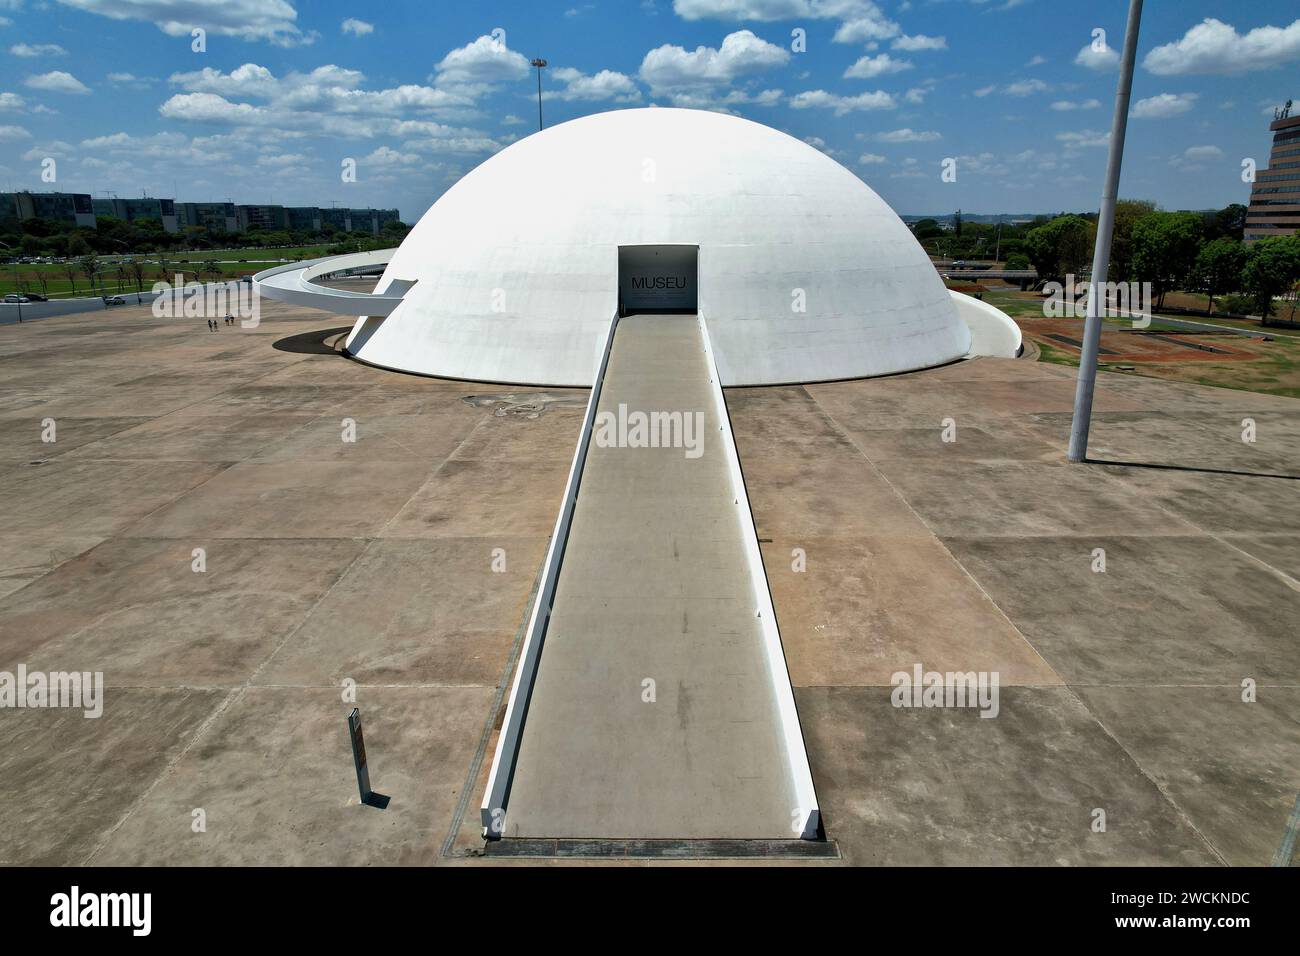 The National Museum of the Republic in Brasilia, Brazil, featuring its iconic dome-shaped architecture. Stock Photo